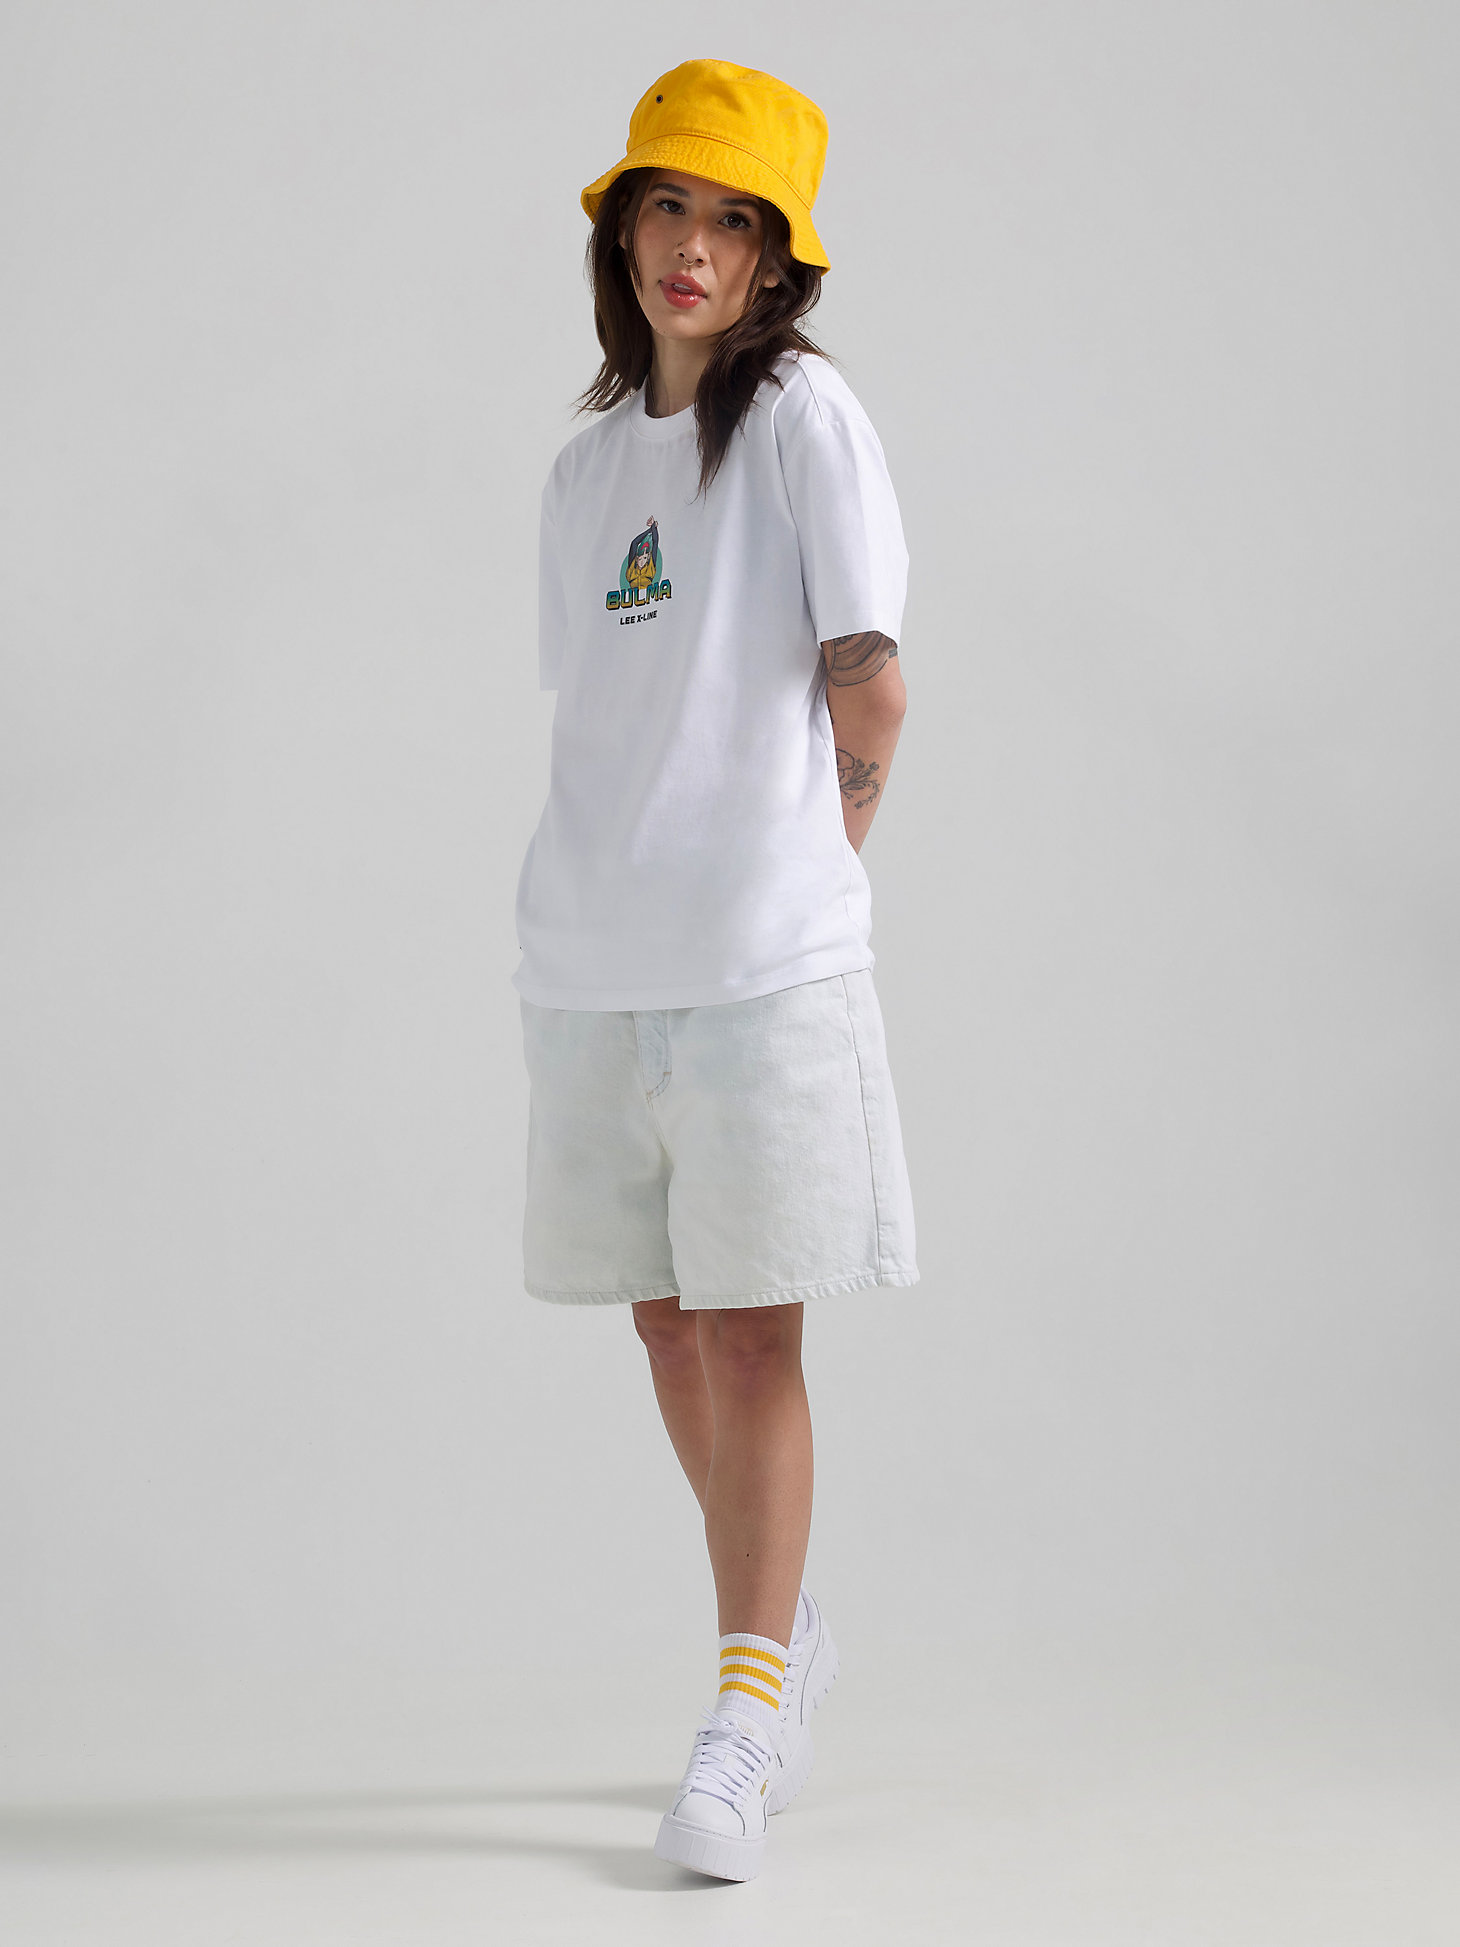 Women's Lee and Dragon Ball Z Bulma Graphic Tee in White alternative view 3